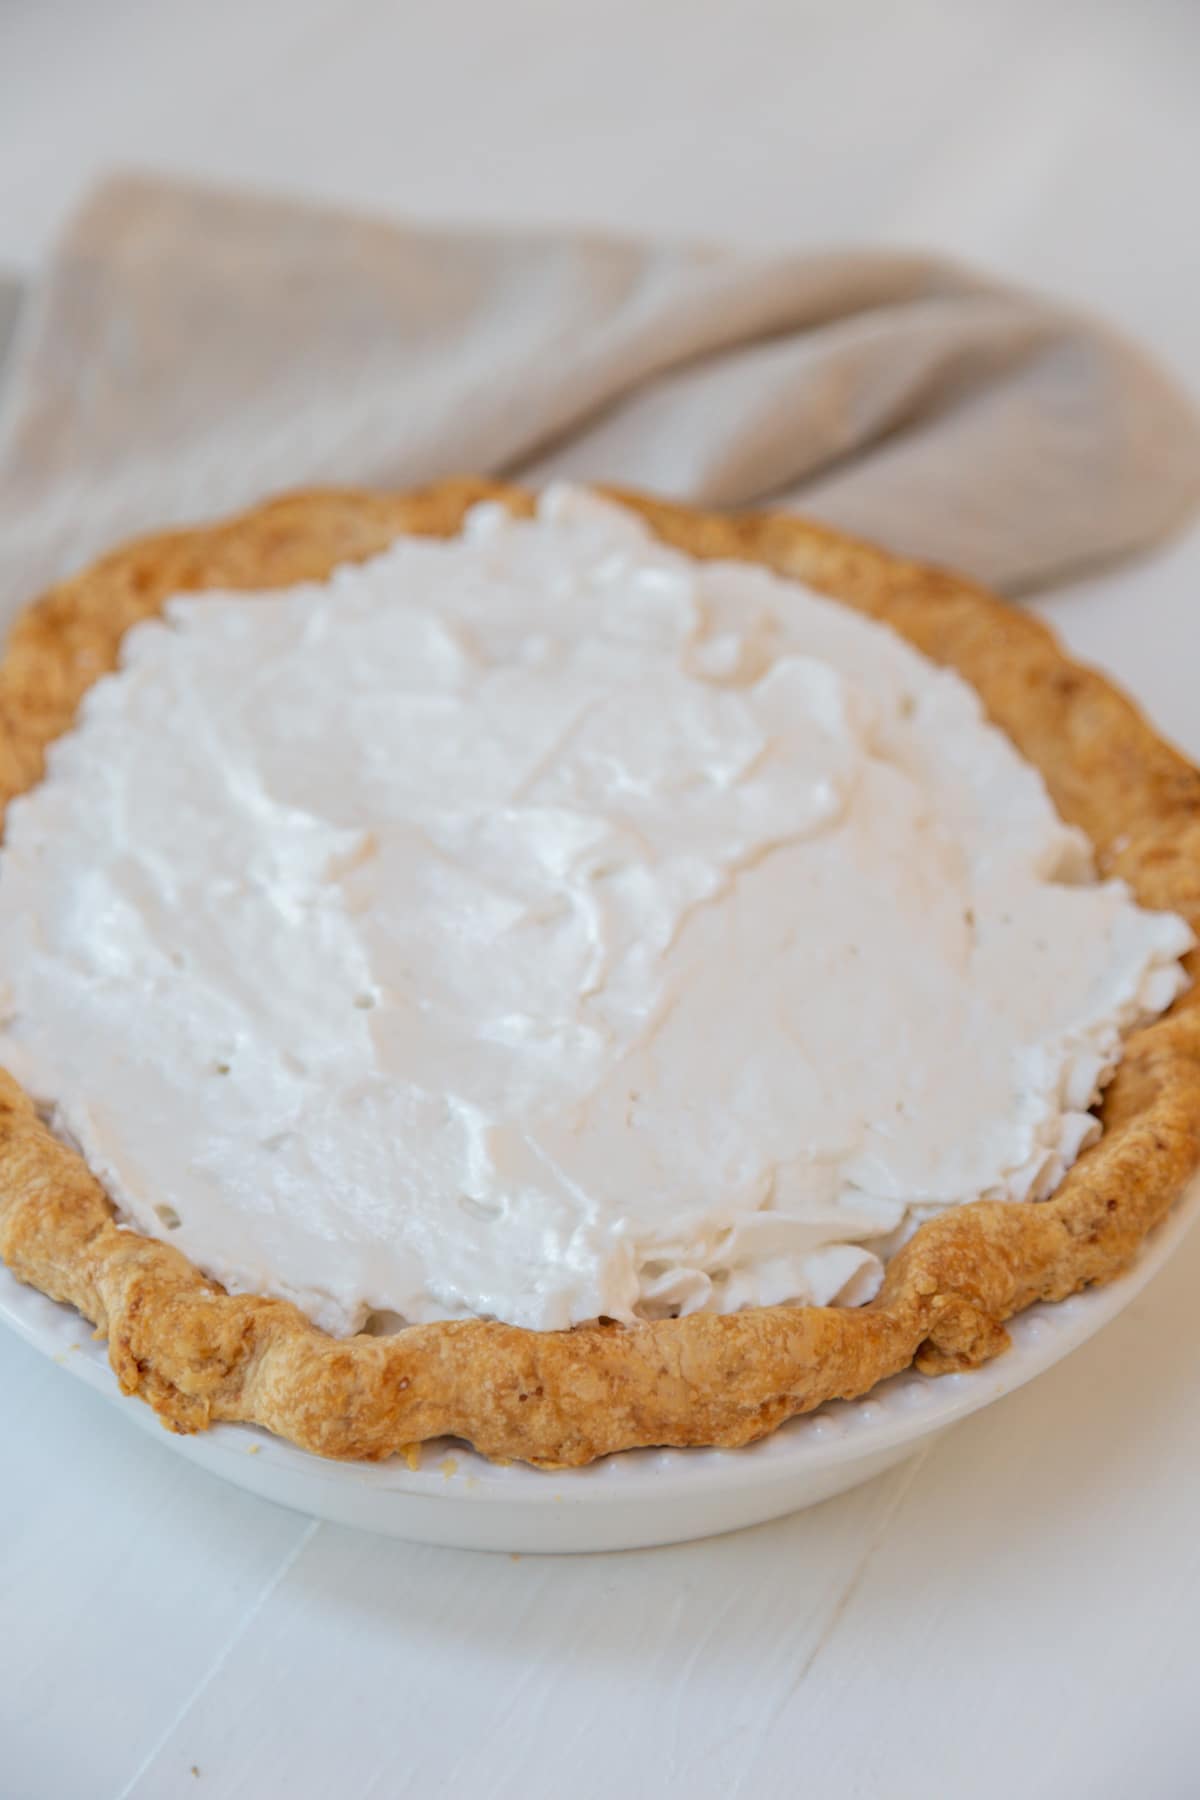 A pie with whipped cream topping.